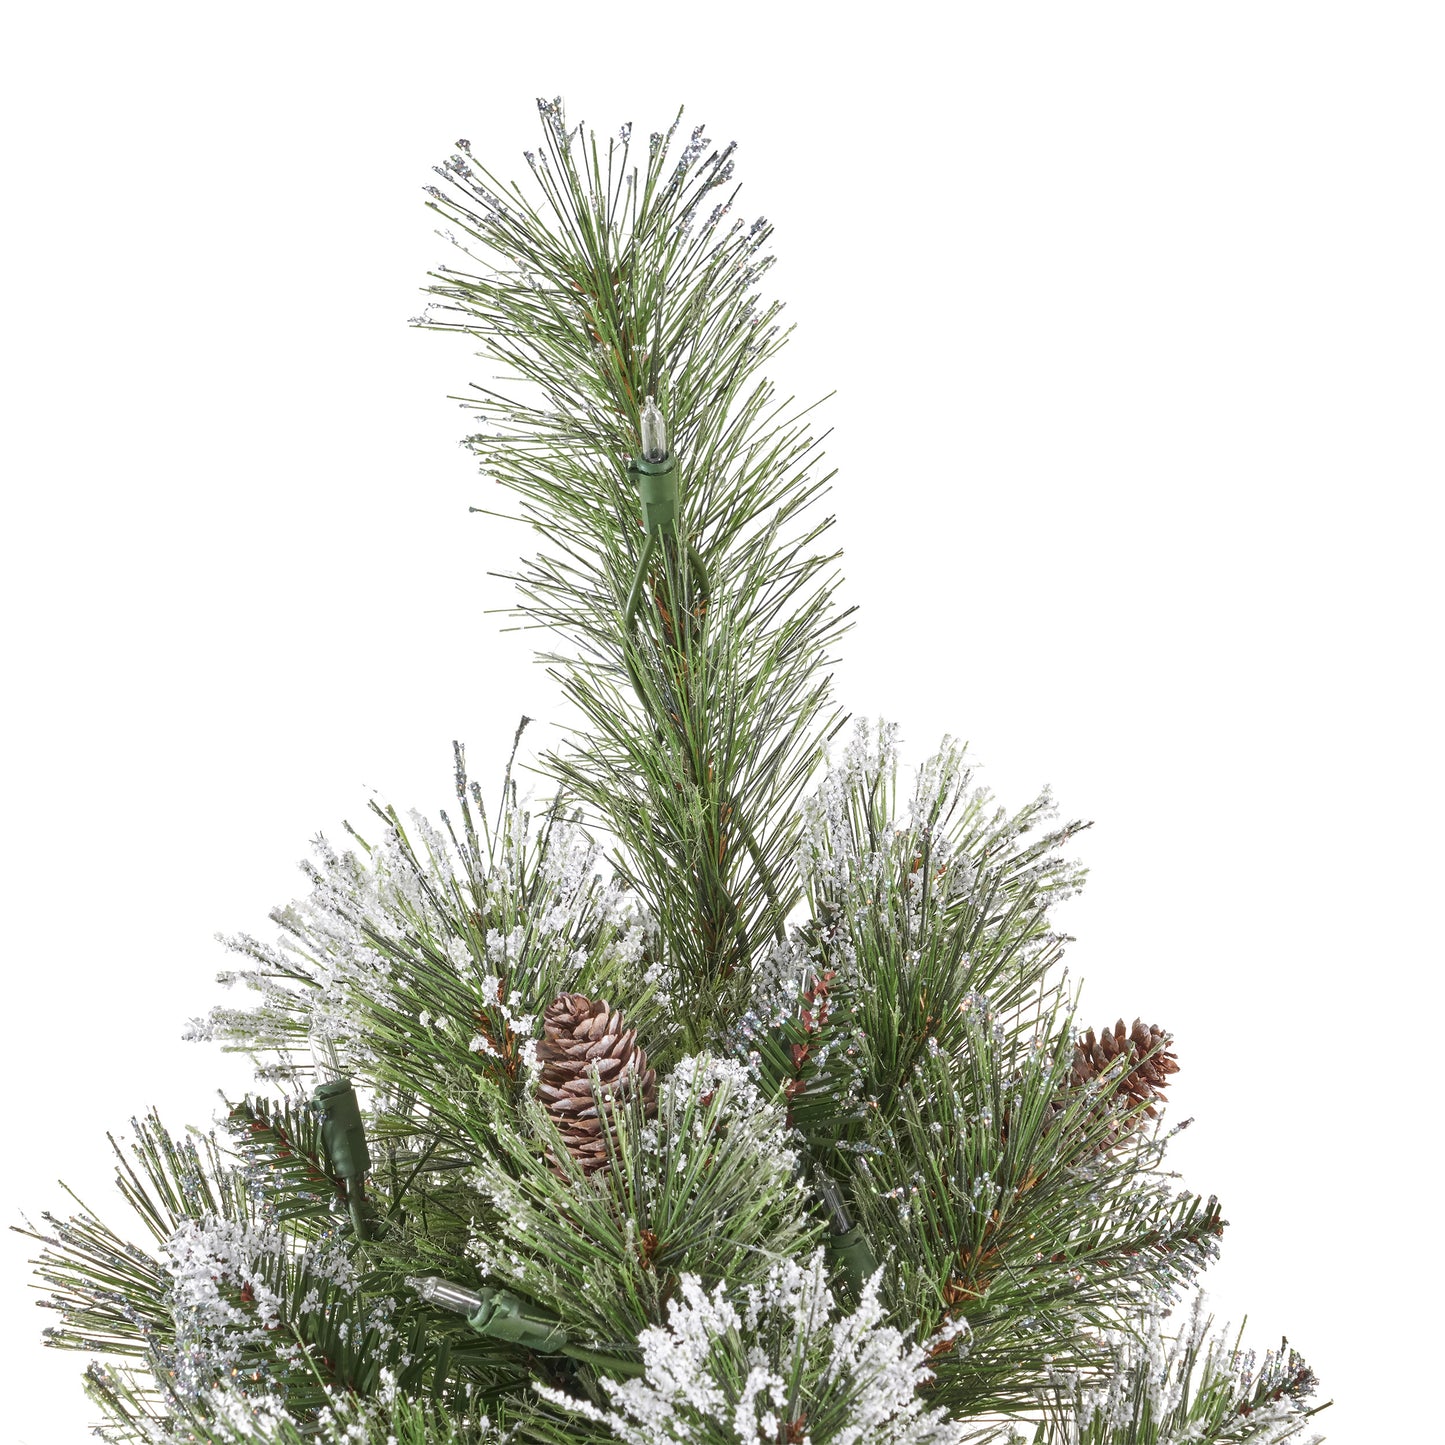 7-foot Cashmere Pine and Mixed Needles Hinged Artificial Christmas Tree with Snow and Glitter Branches and Frosted Pinecones